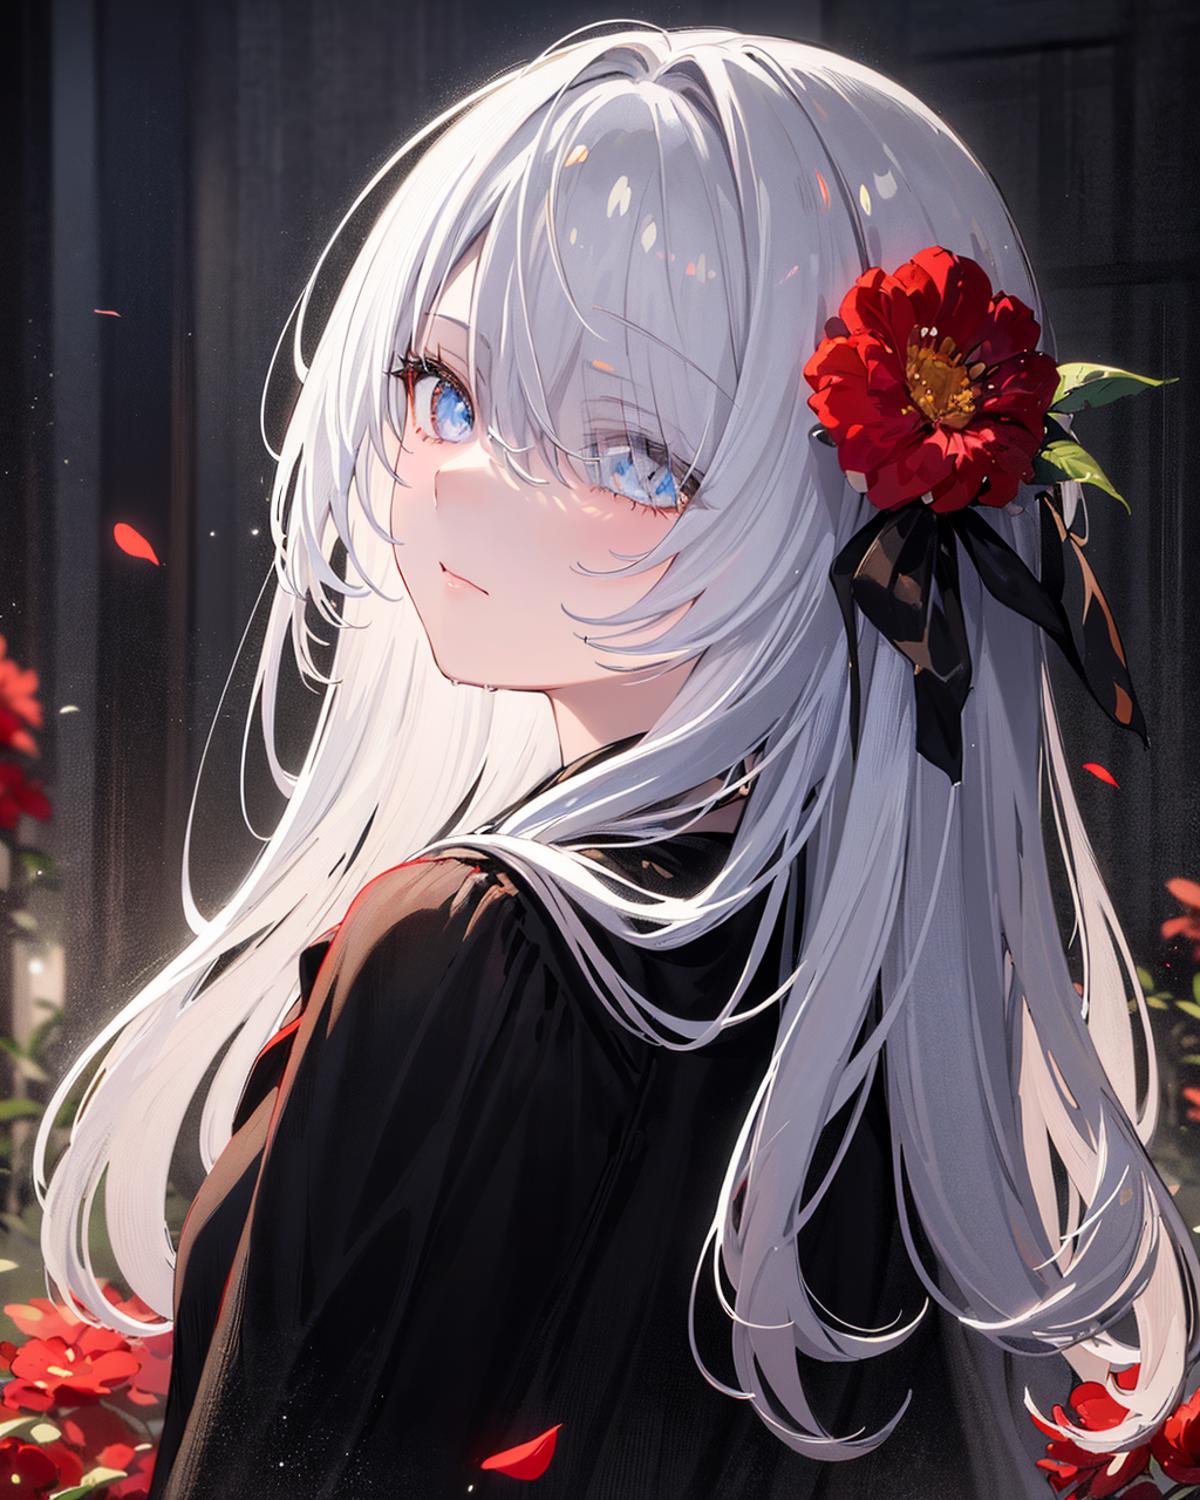 anime girl with silver hair and silver eyes